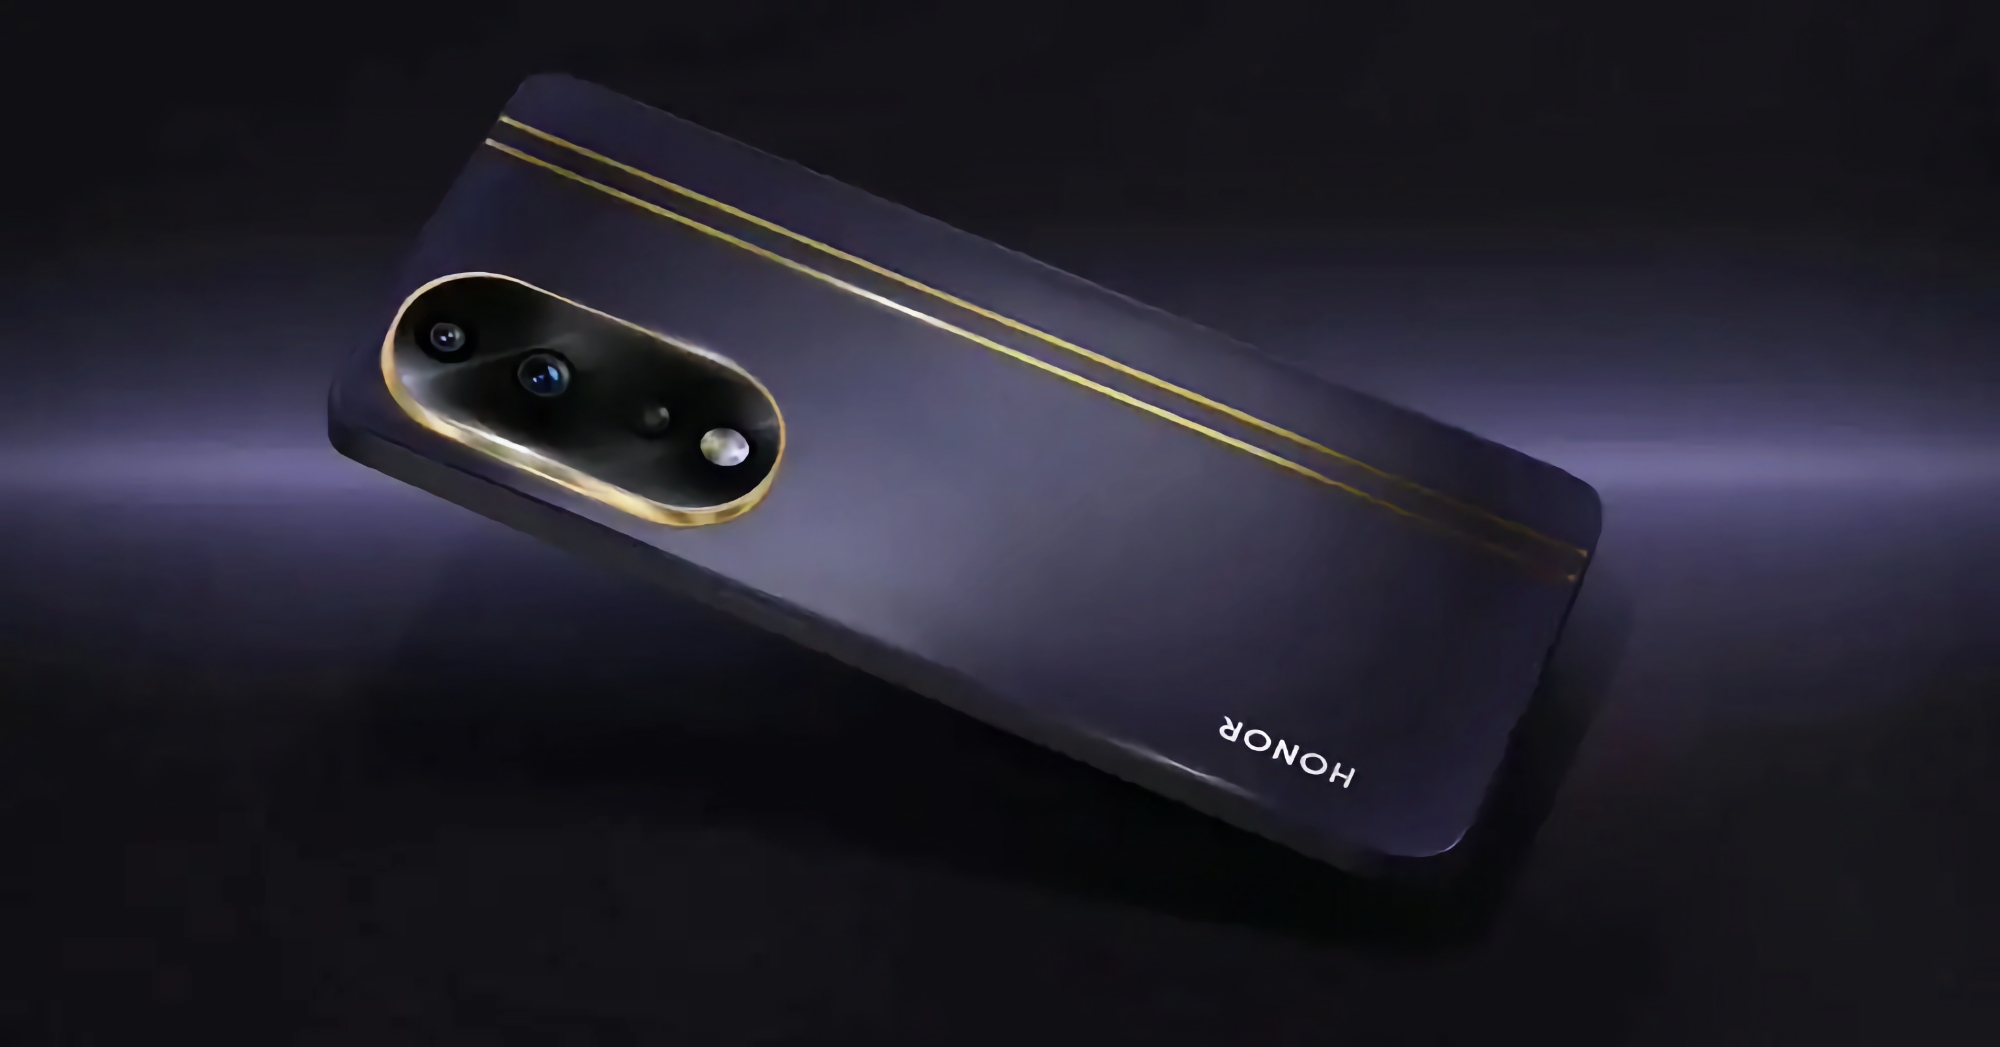 An image of the Honor 90 GT gaming smartphone has surfaced on the internet